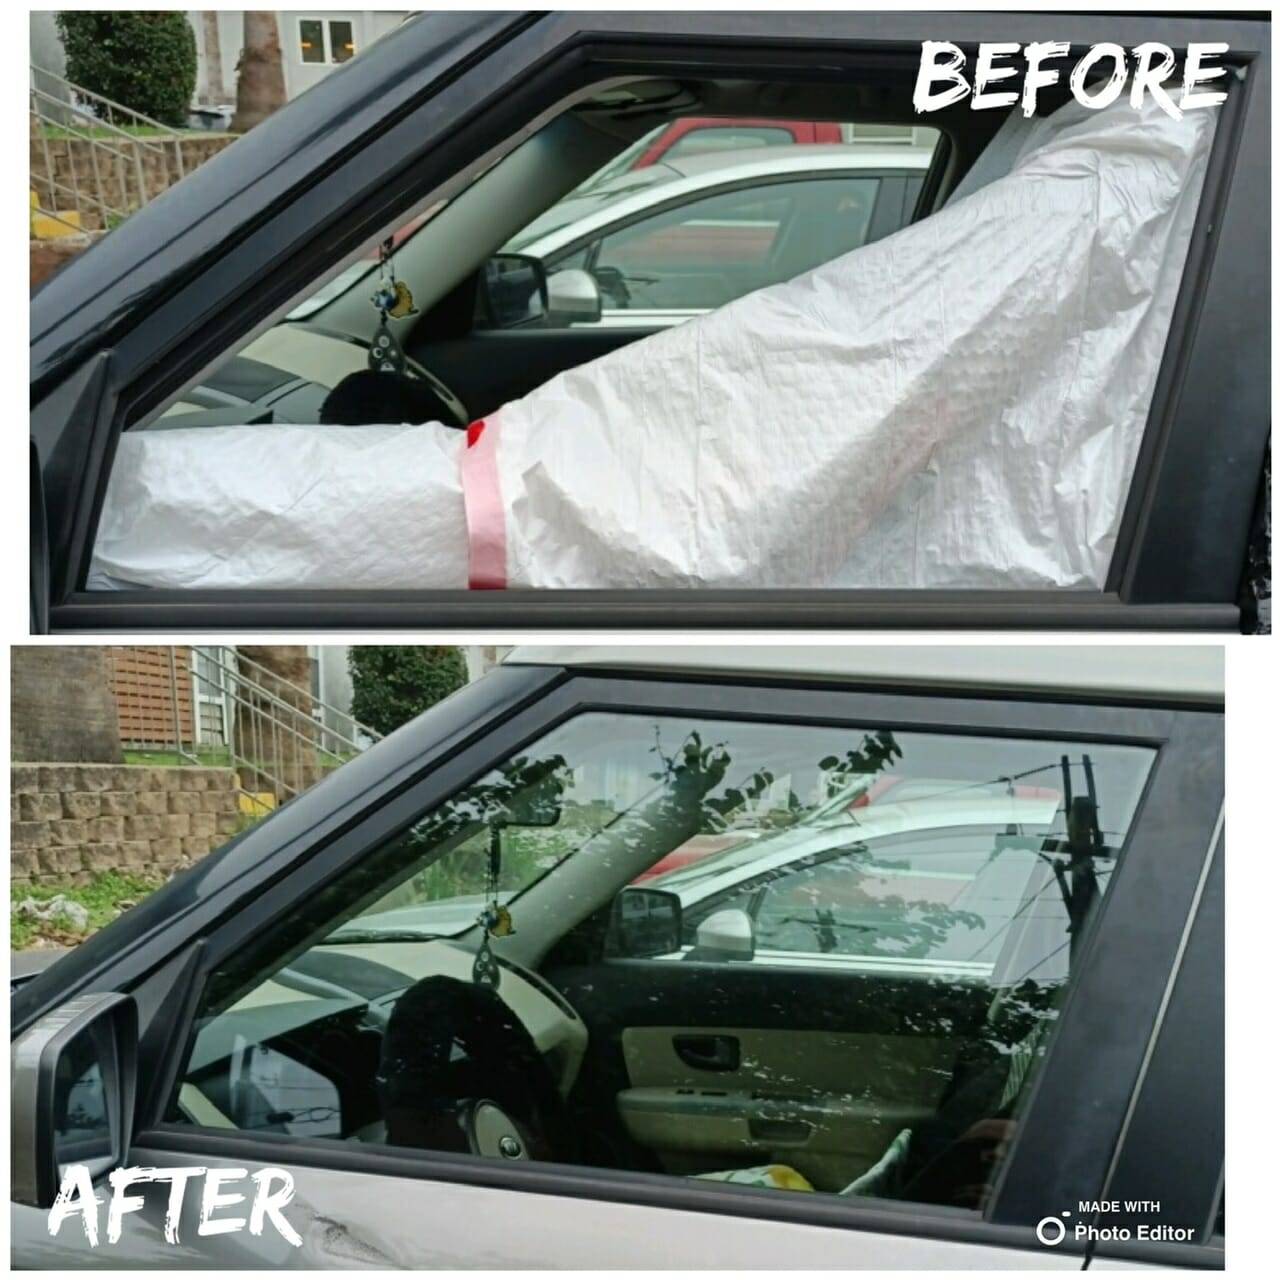 This split image illustrates the transformation of a sedan's driver side left front door glass during a home auto glass appointment in Marion, Texas. The top half of the image displays the completely shattered door glass after an attempted burglary, with a plastic bag serving as a temporary covering. The bottom half reveals the fully replaced and restored door glass, showcasing the significant improvement and quality workmanship involved in the process.